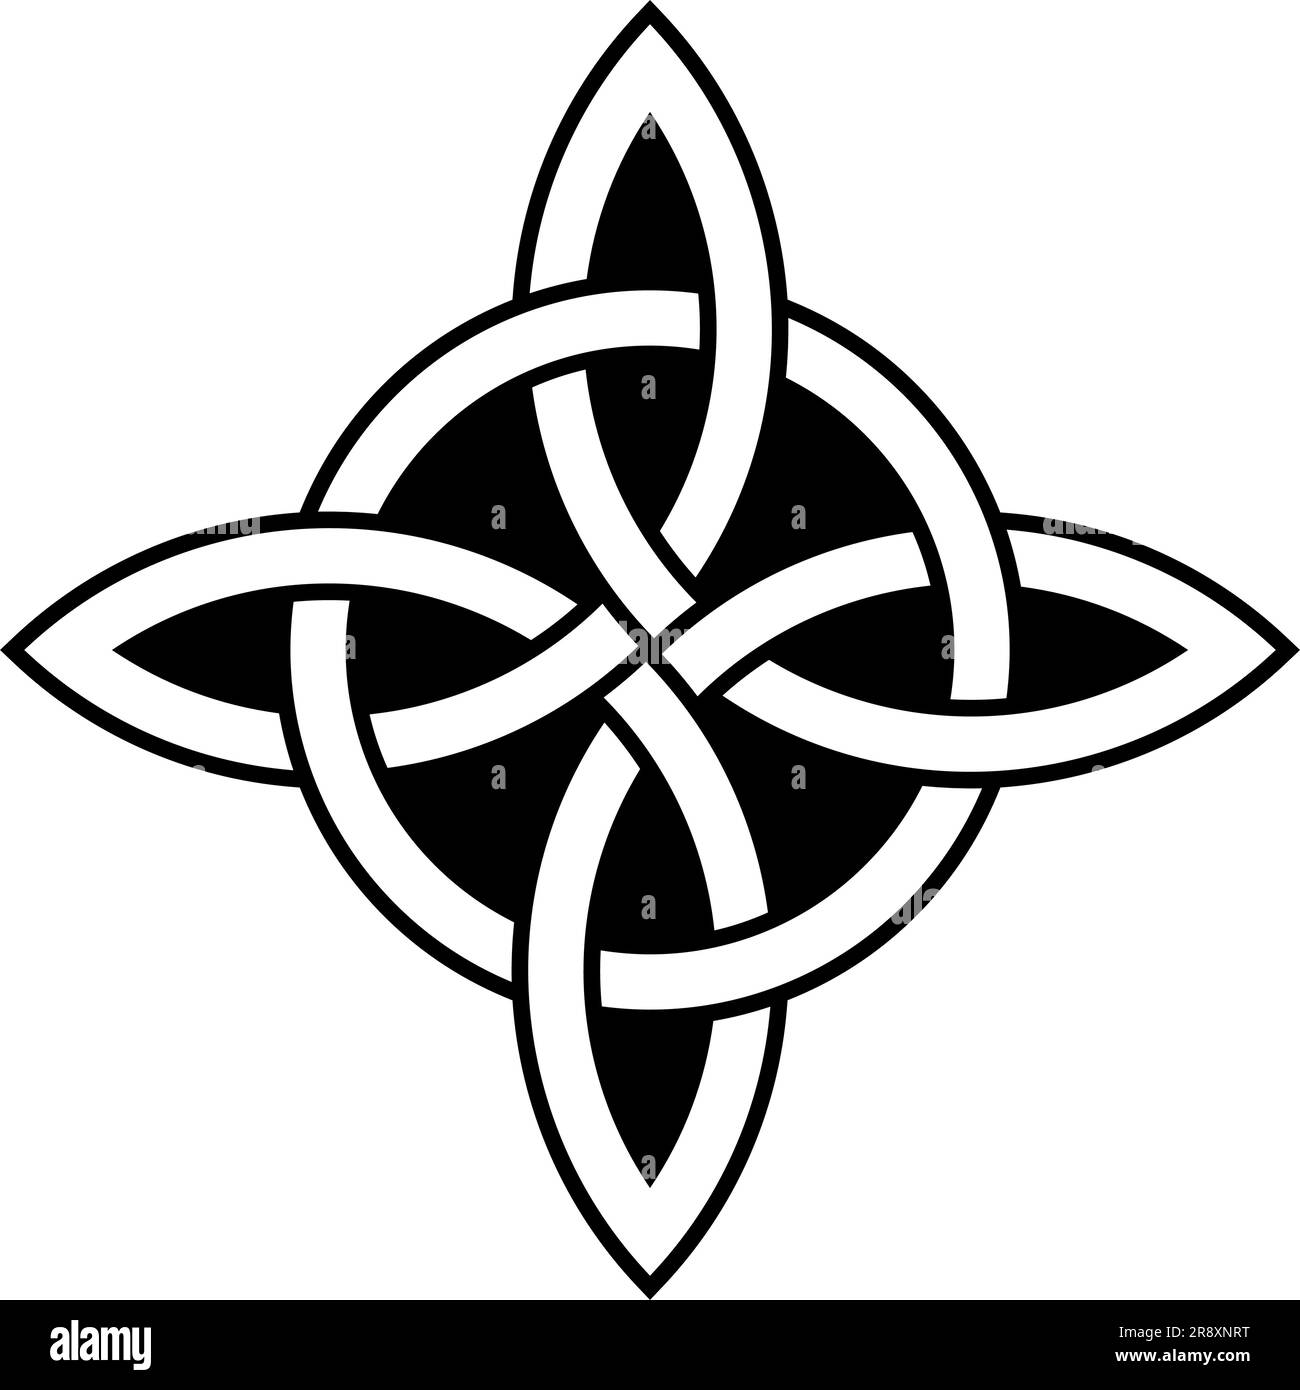 Bowen knot in black outline. Celtic symbol known as true lover's knot.  The Bowen knot symbolizes a man's true love and loyalty to his woman. Stock Vector